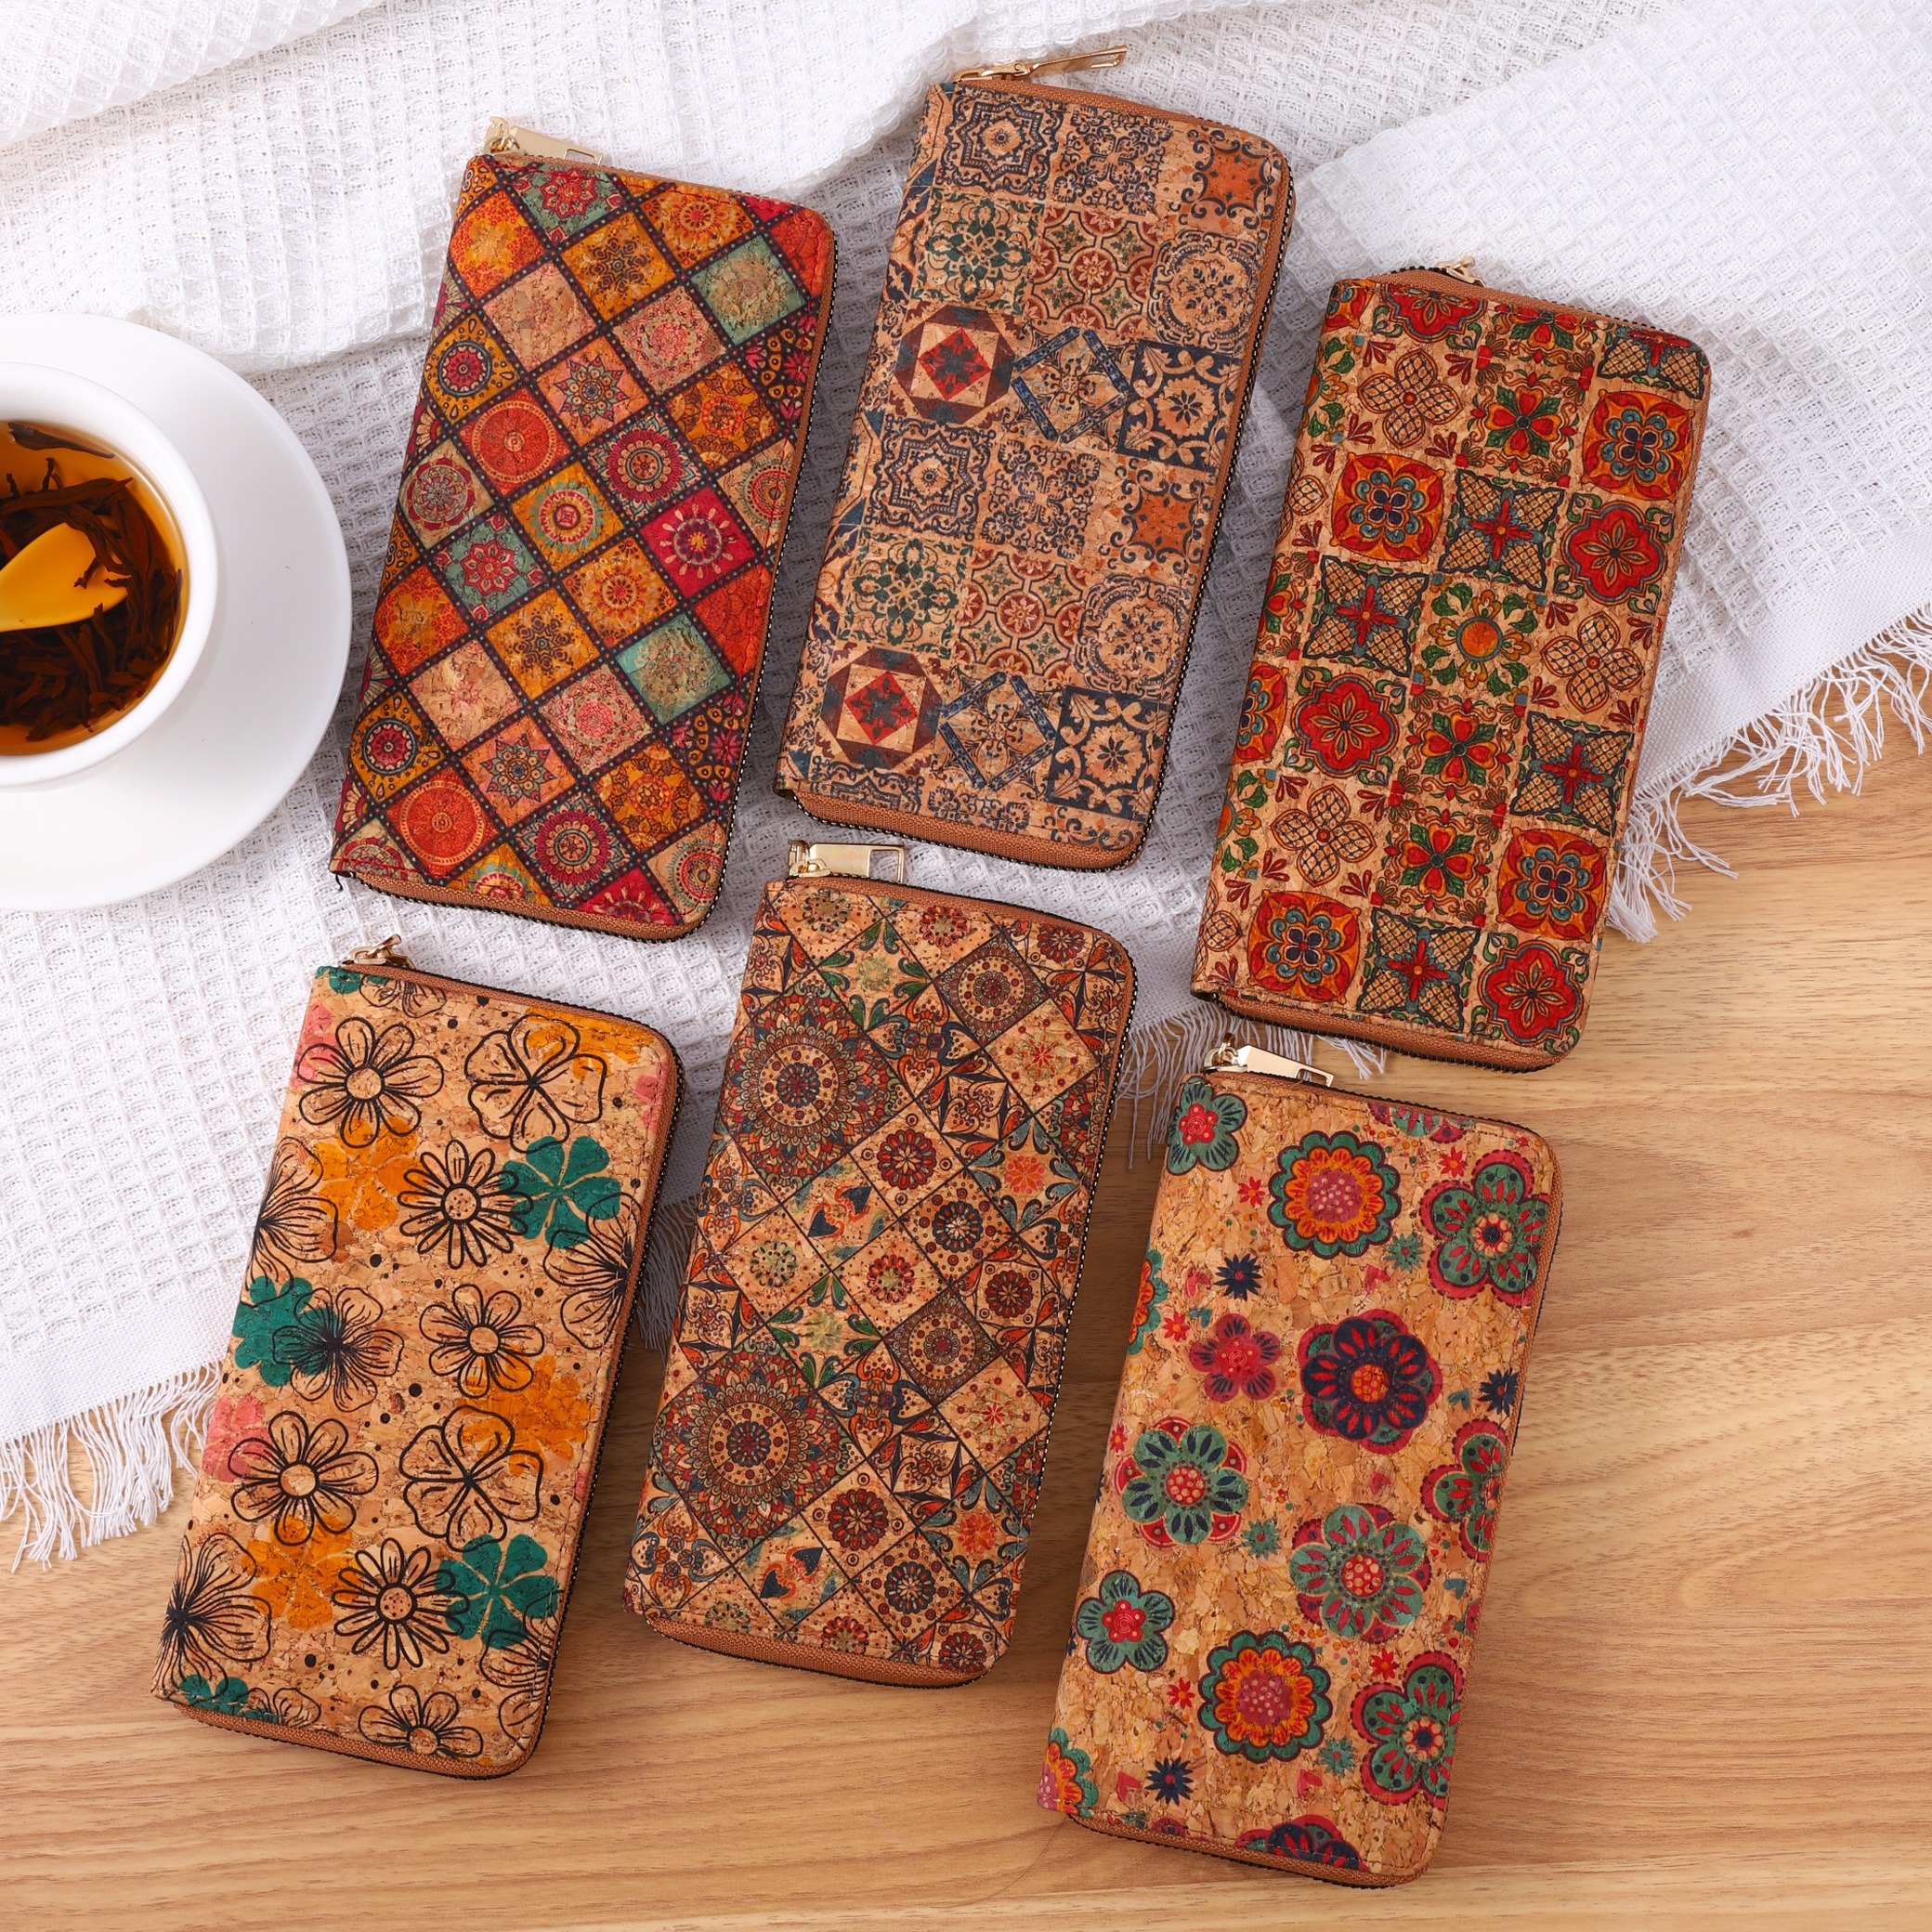 

Vegan Leather Long Wallet For Women, Floral Print Clutch Coin Purse, Vintage Faux Wooden Credit Card Holder